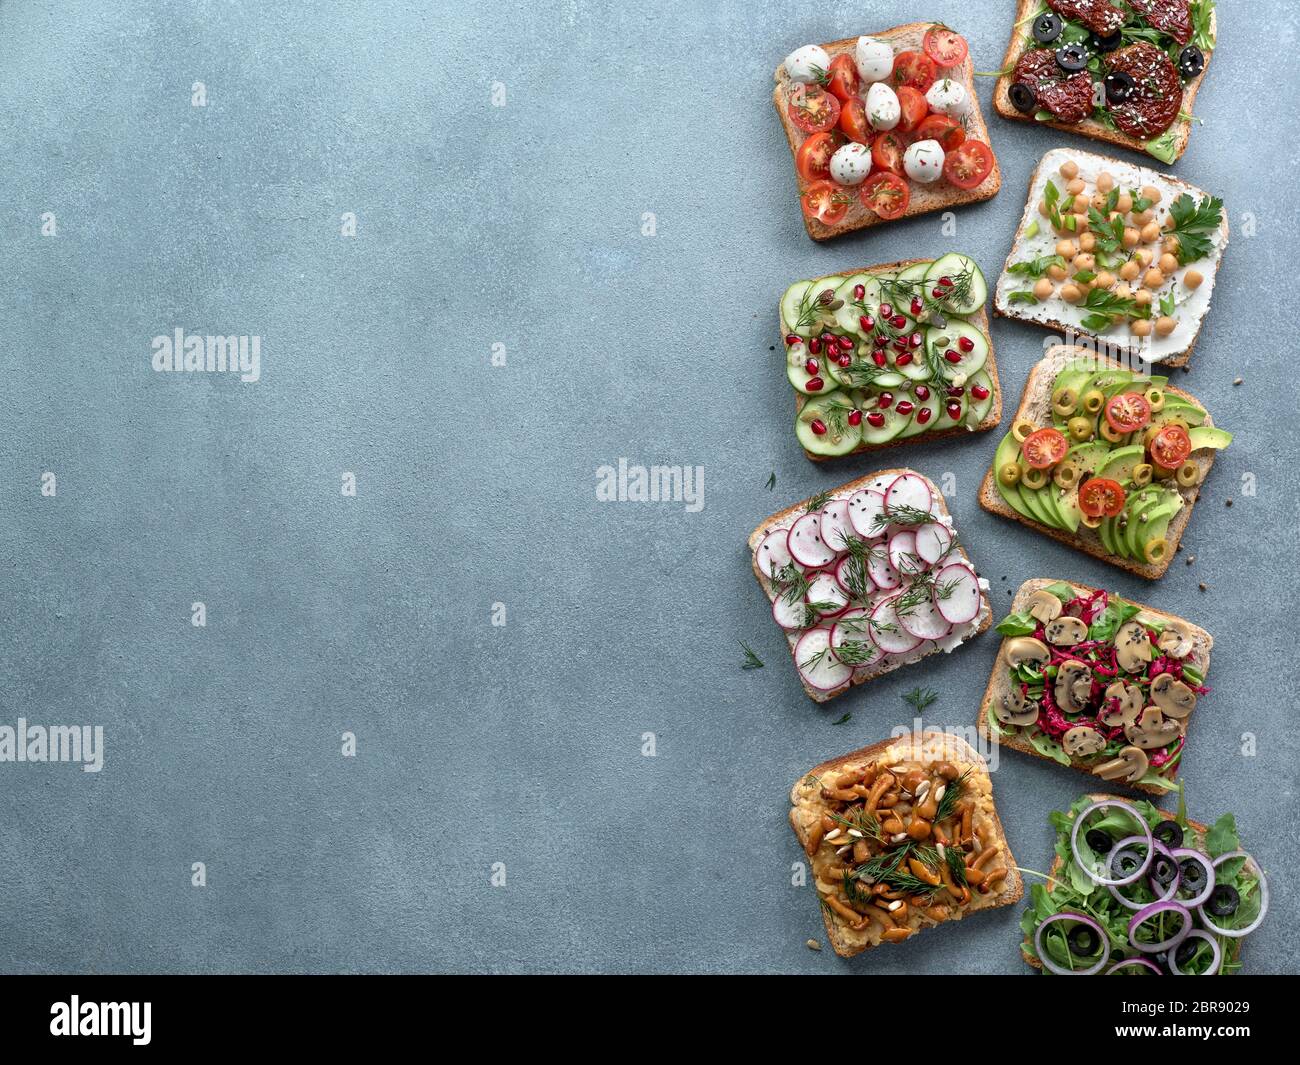 Assortment vegan sandwiches on gray stone background. Set different vegetarian smorrebrod. Top view or flat lay. Copy space for text. Stock Photo